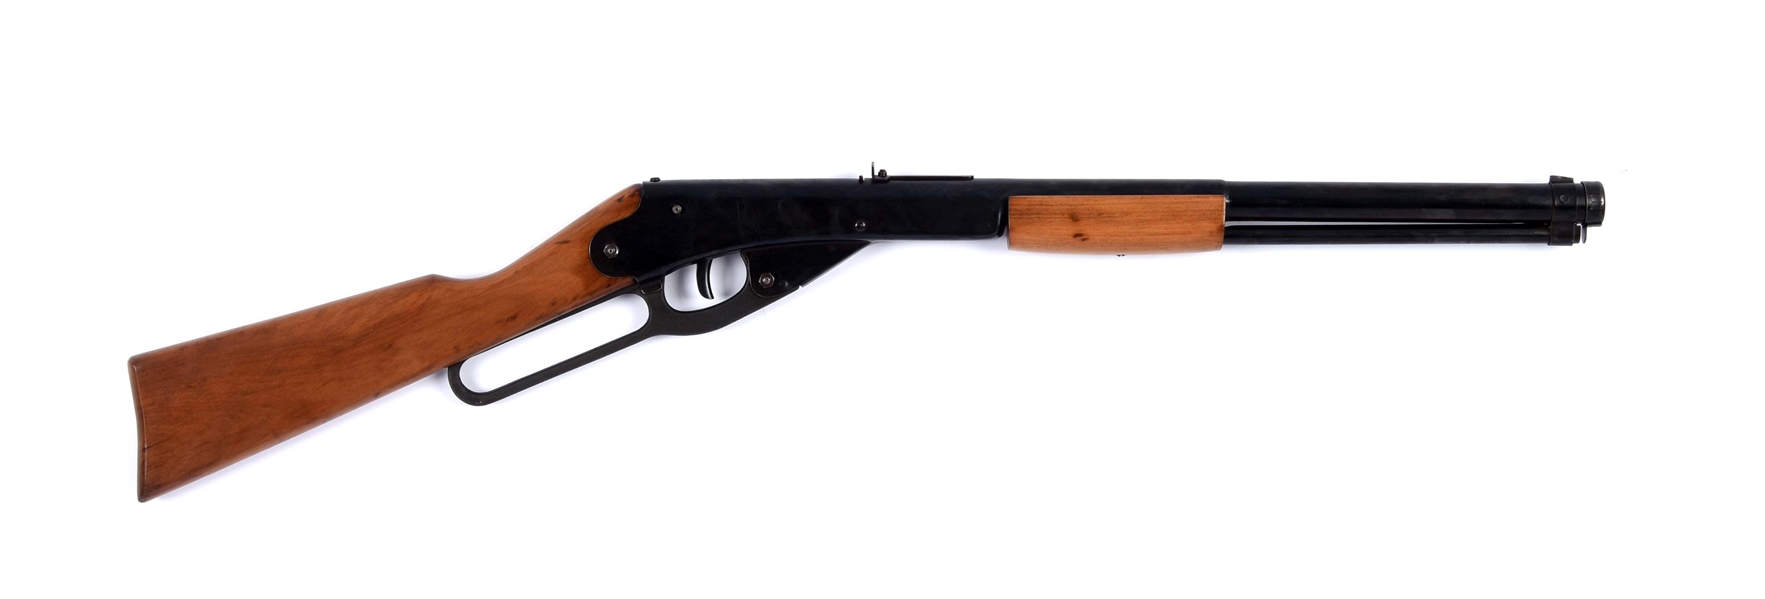 DAISY MODEL 108 SERIES 39 LONE SCOUT AIR RIFLE